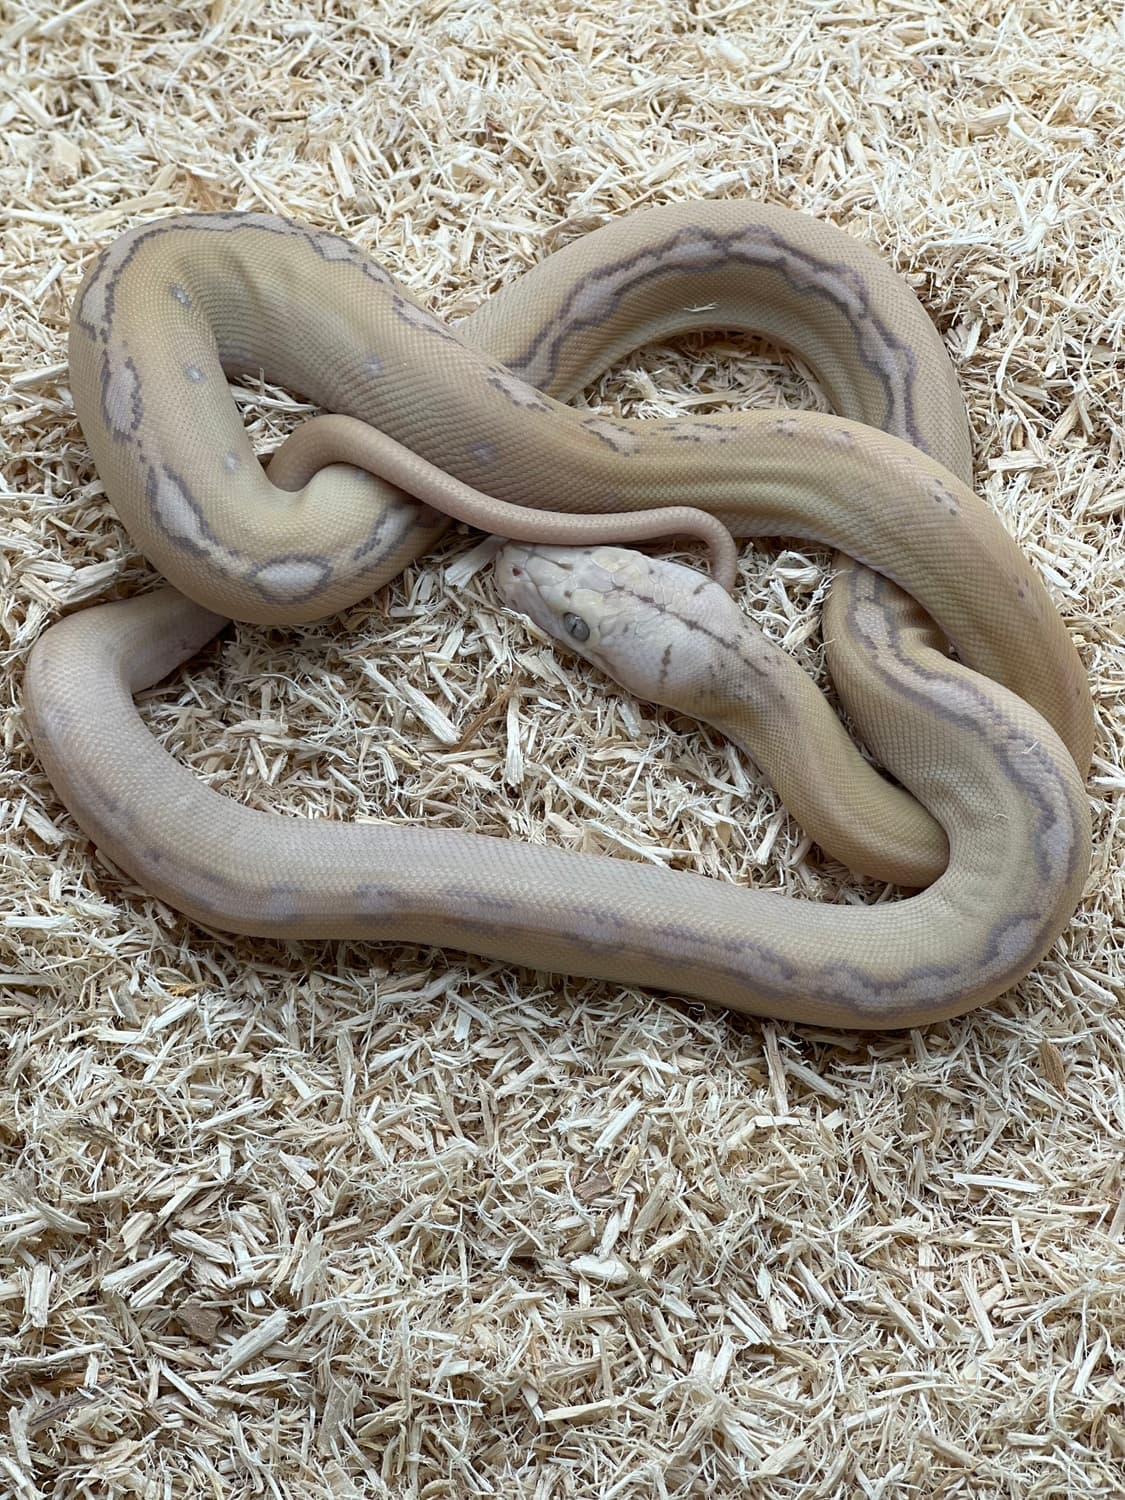 Snow Goldenchild Sunfire Reticulated Python by Prehistoric Pets